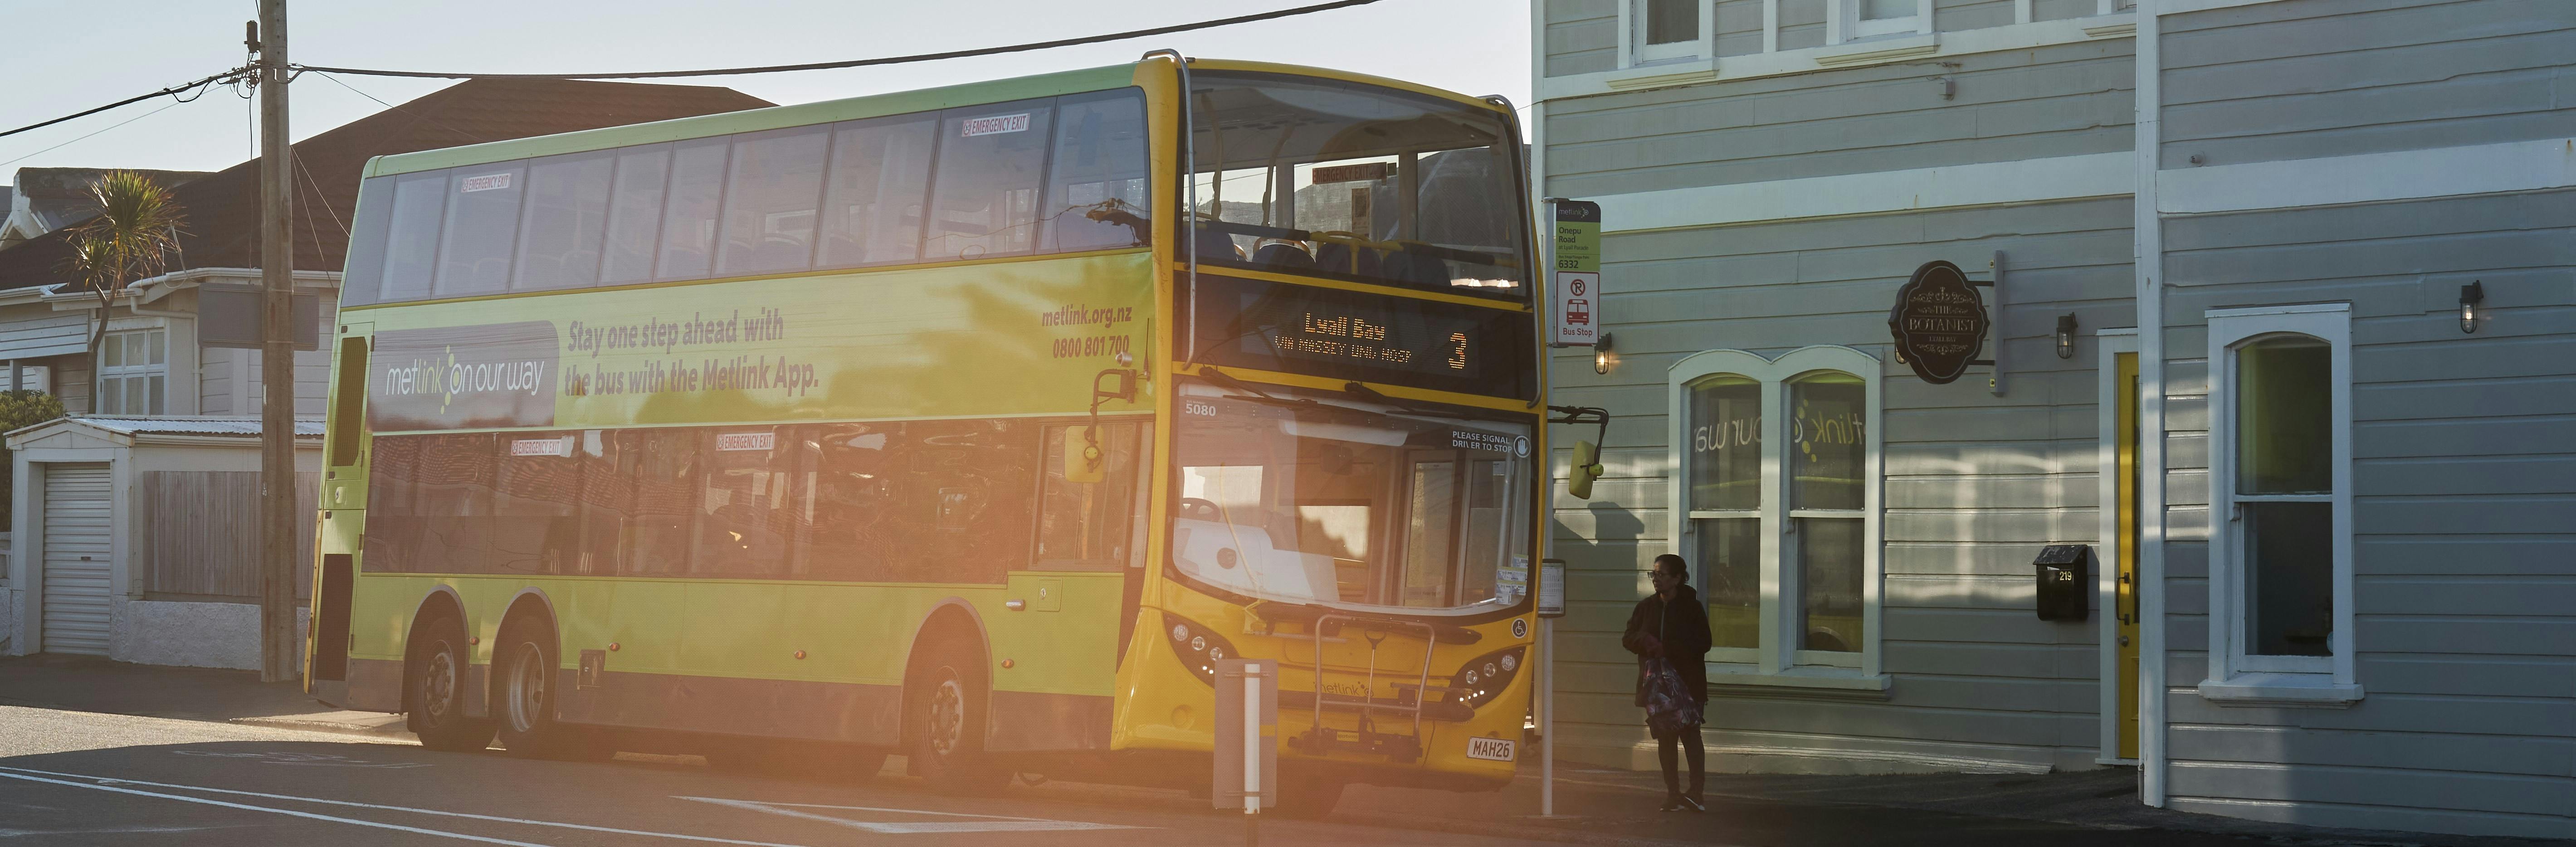 Photo of number 3 Lyall Bay bus waiting at a stop with a passenger waiting to get on